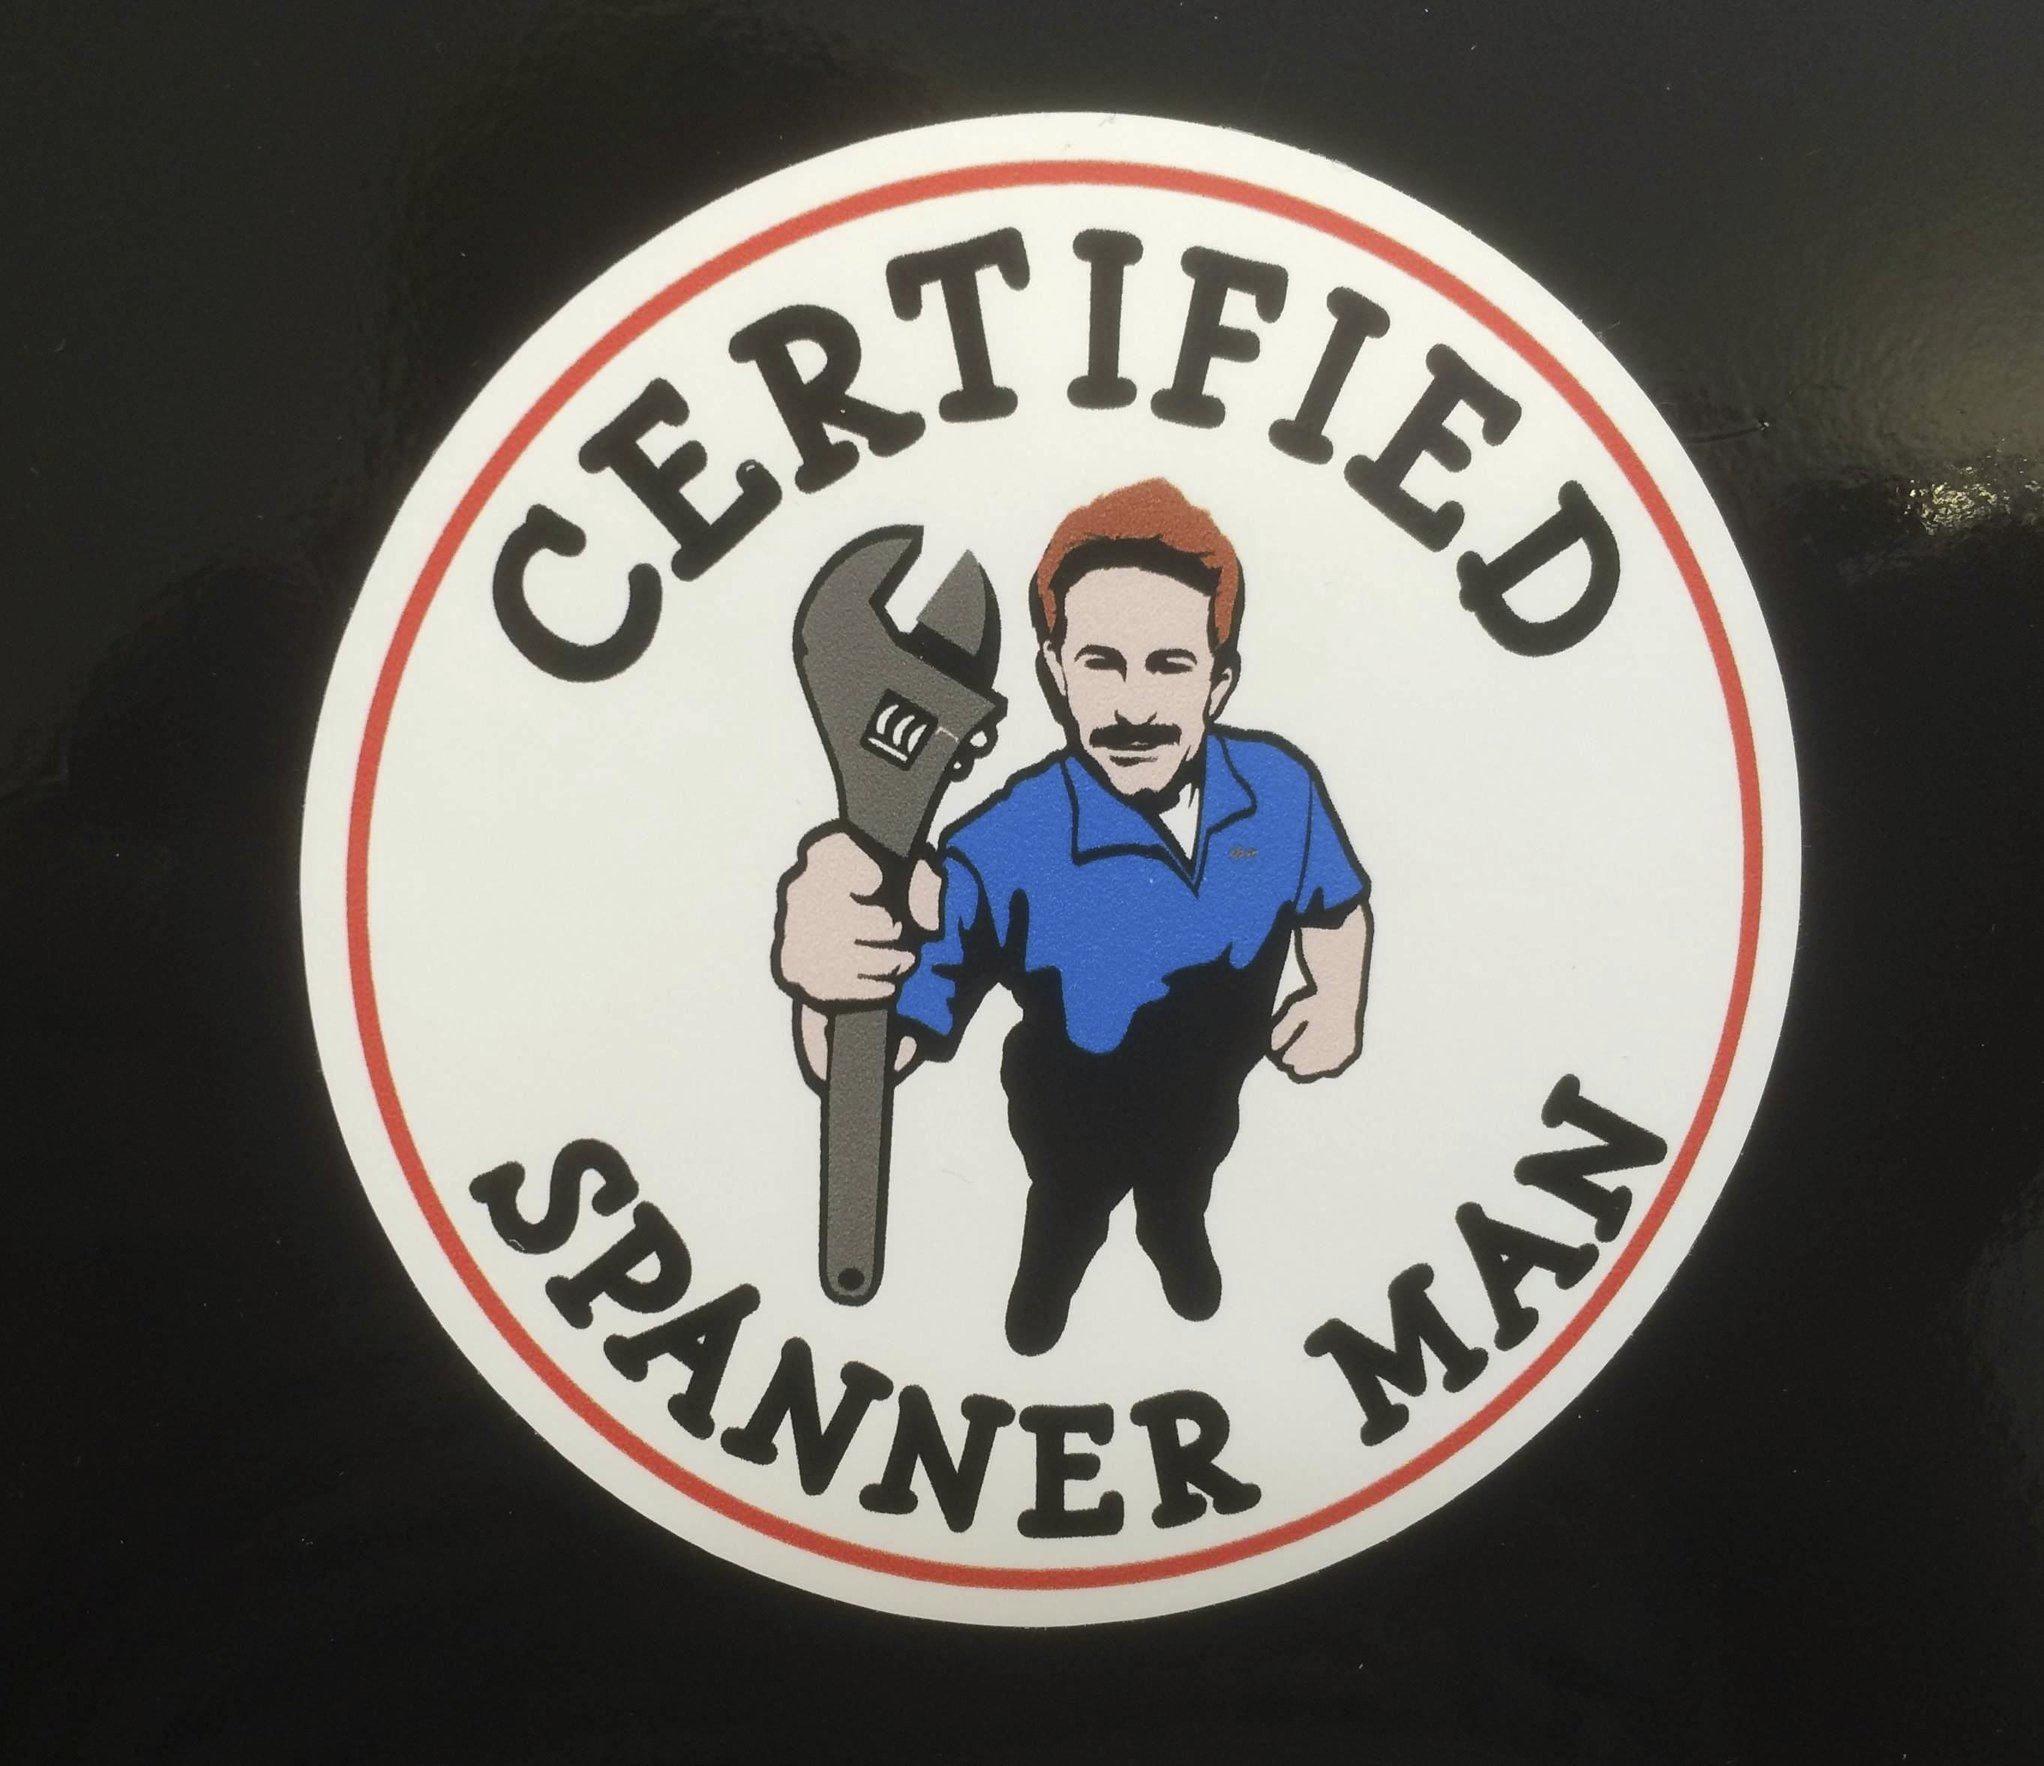 Certified Spanner Man in black lettering surrounds a man dressed in blue overalls holding a spanner. A white circular sticker with a red border.